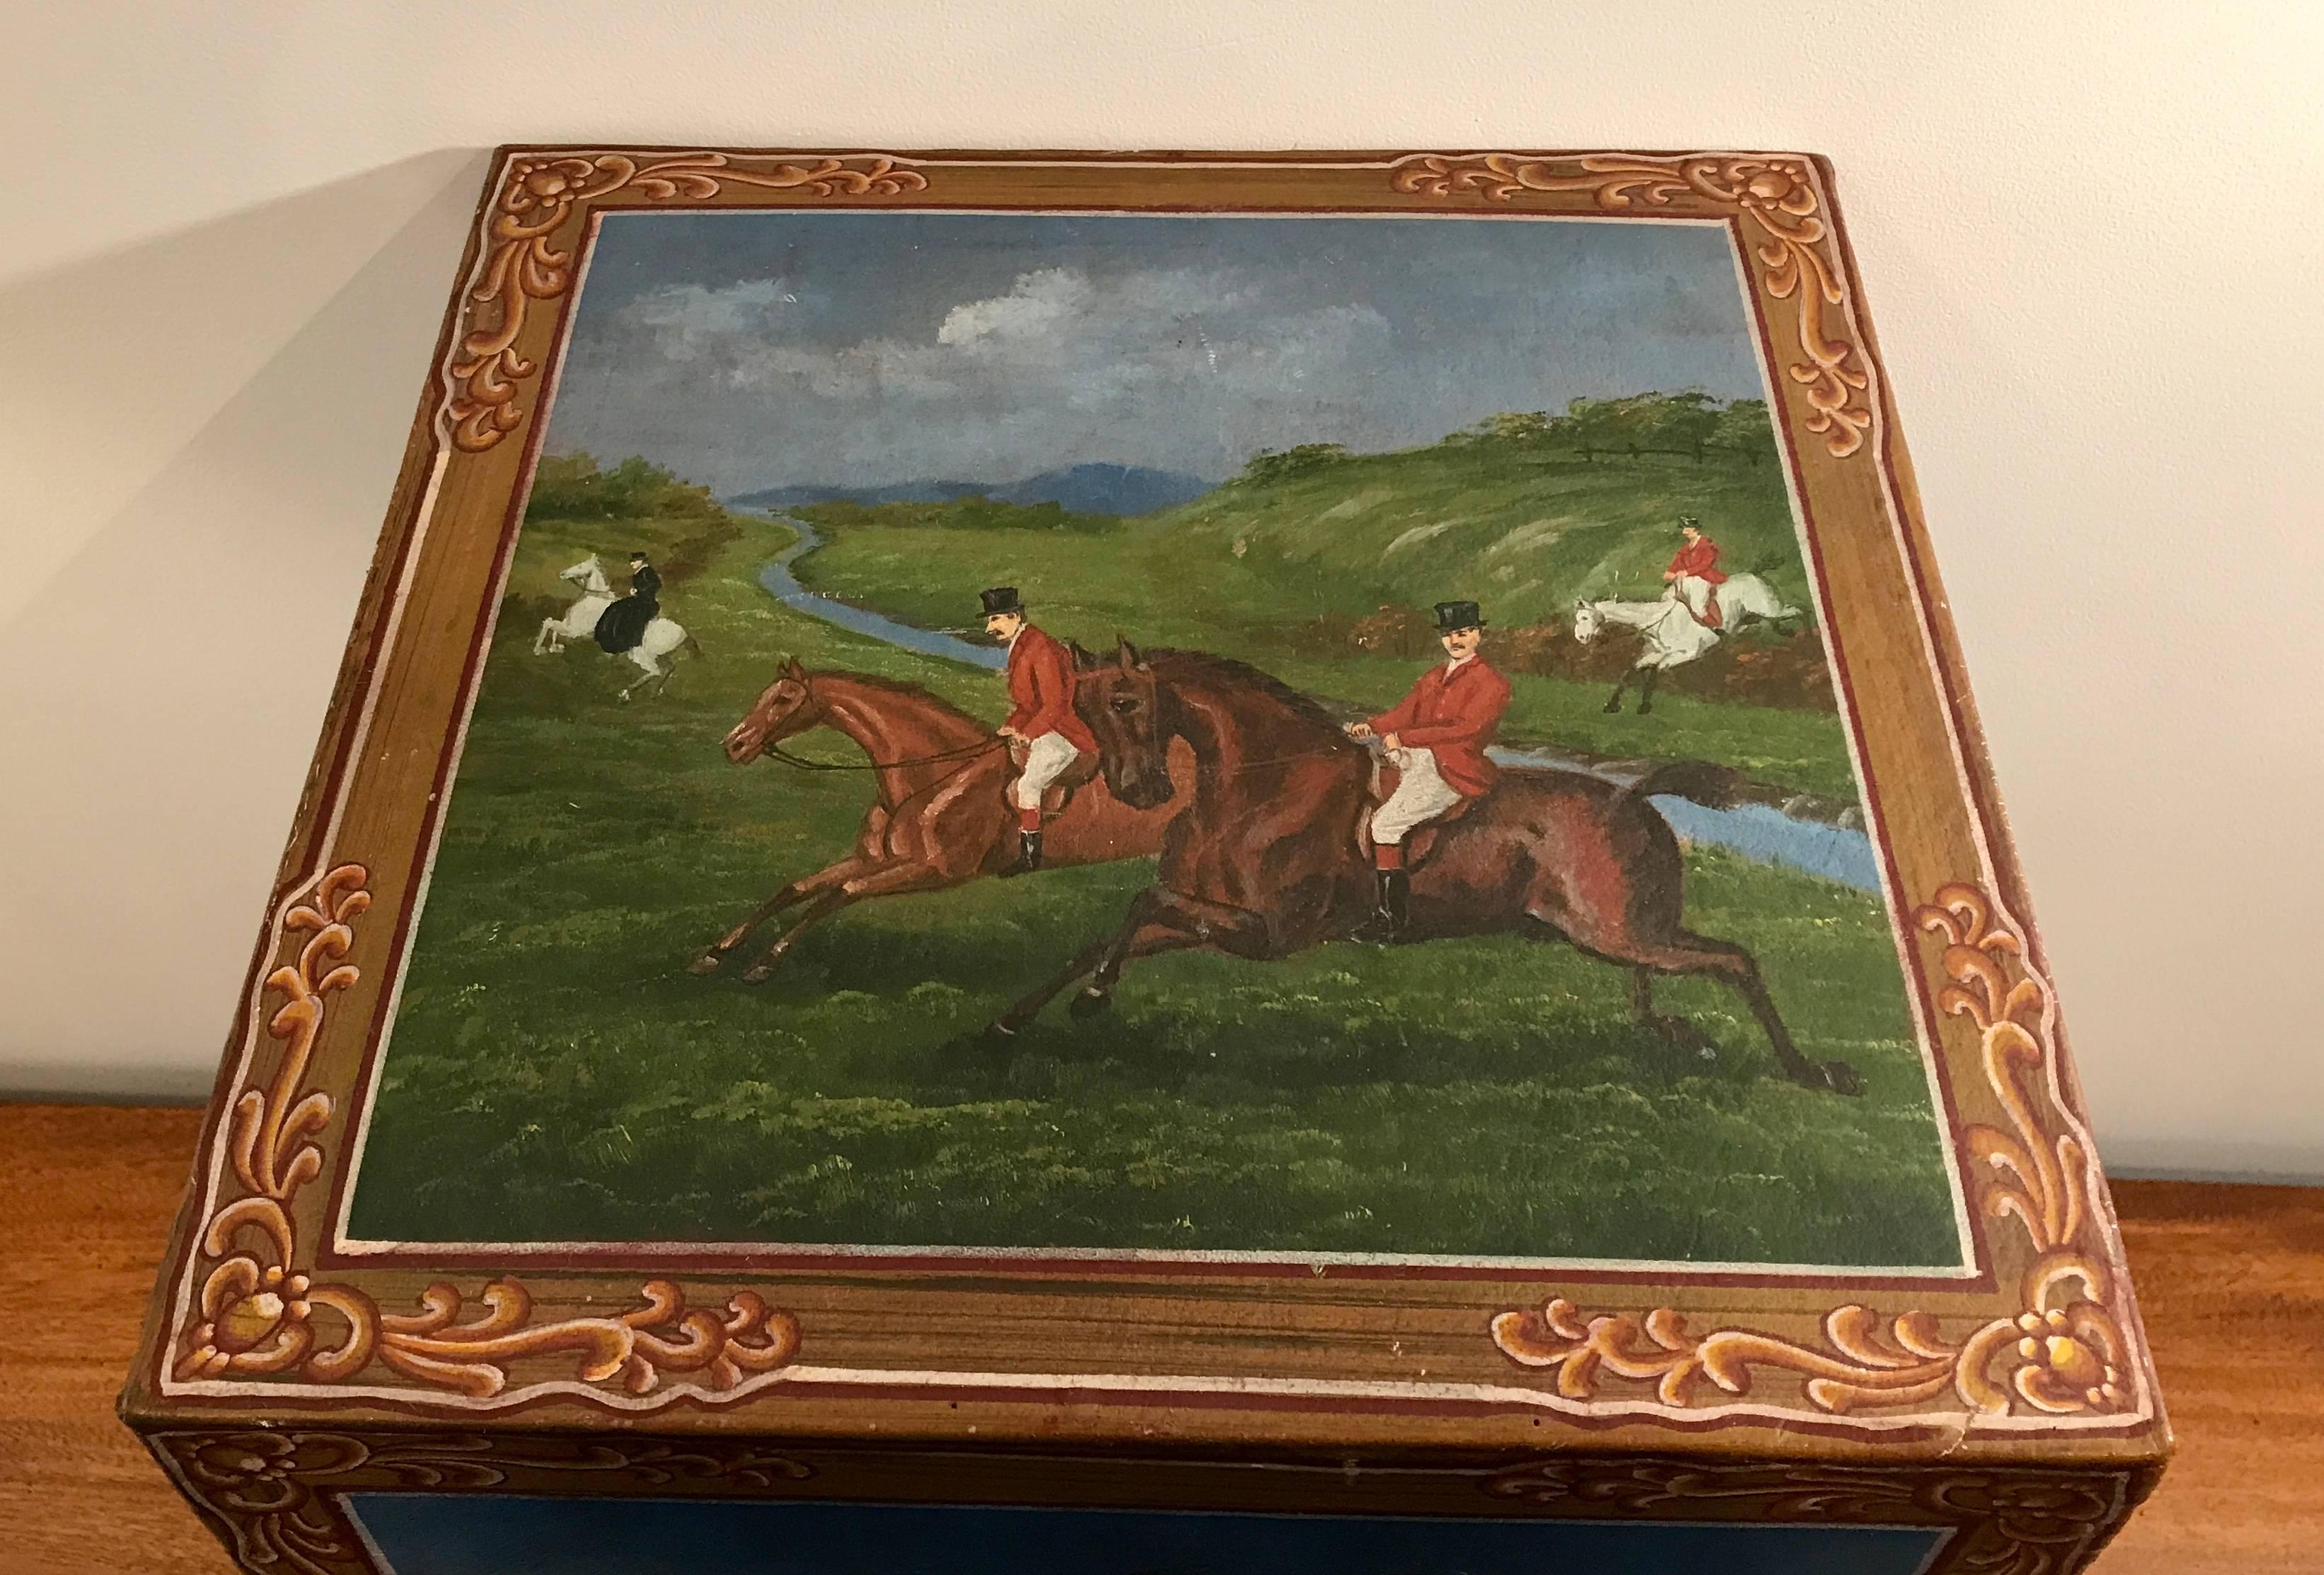 Beautiful hand-painted Arts & Crafts horse tack box consisting of five stackable storage compartments. Painted on leather. Very well made with detailed corner stitching. The top of the box depicts four equestrian riders, the front depicts a man